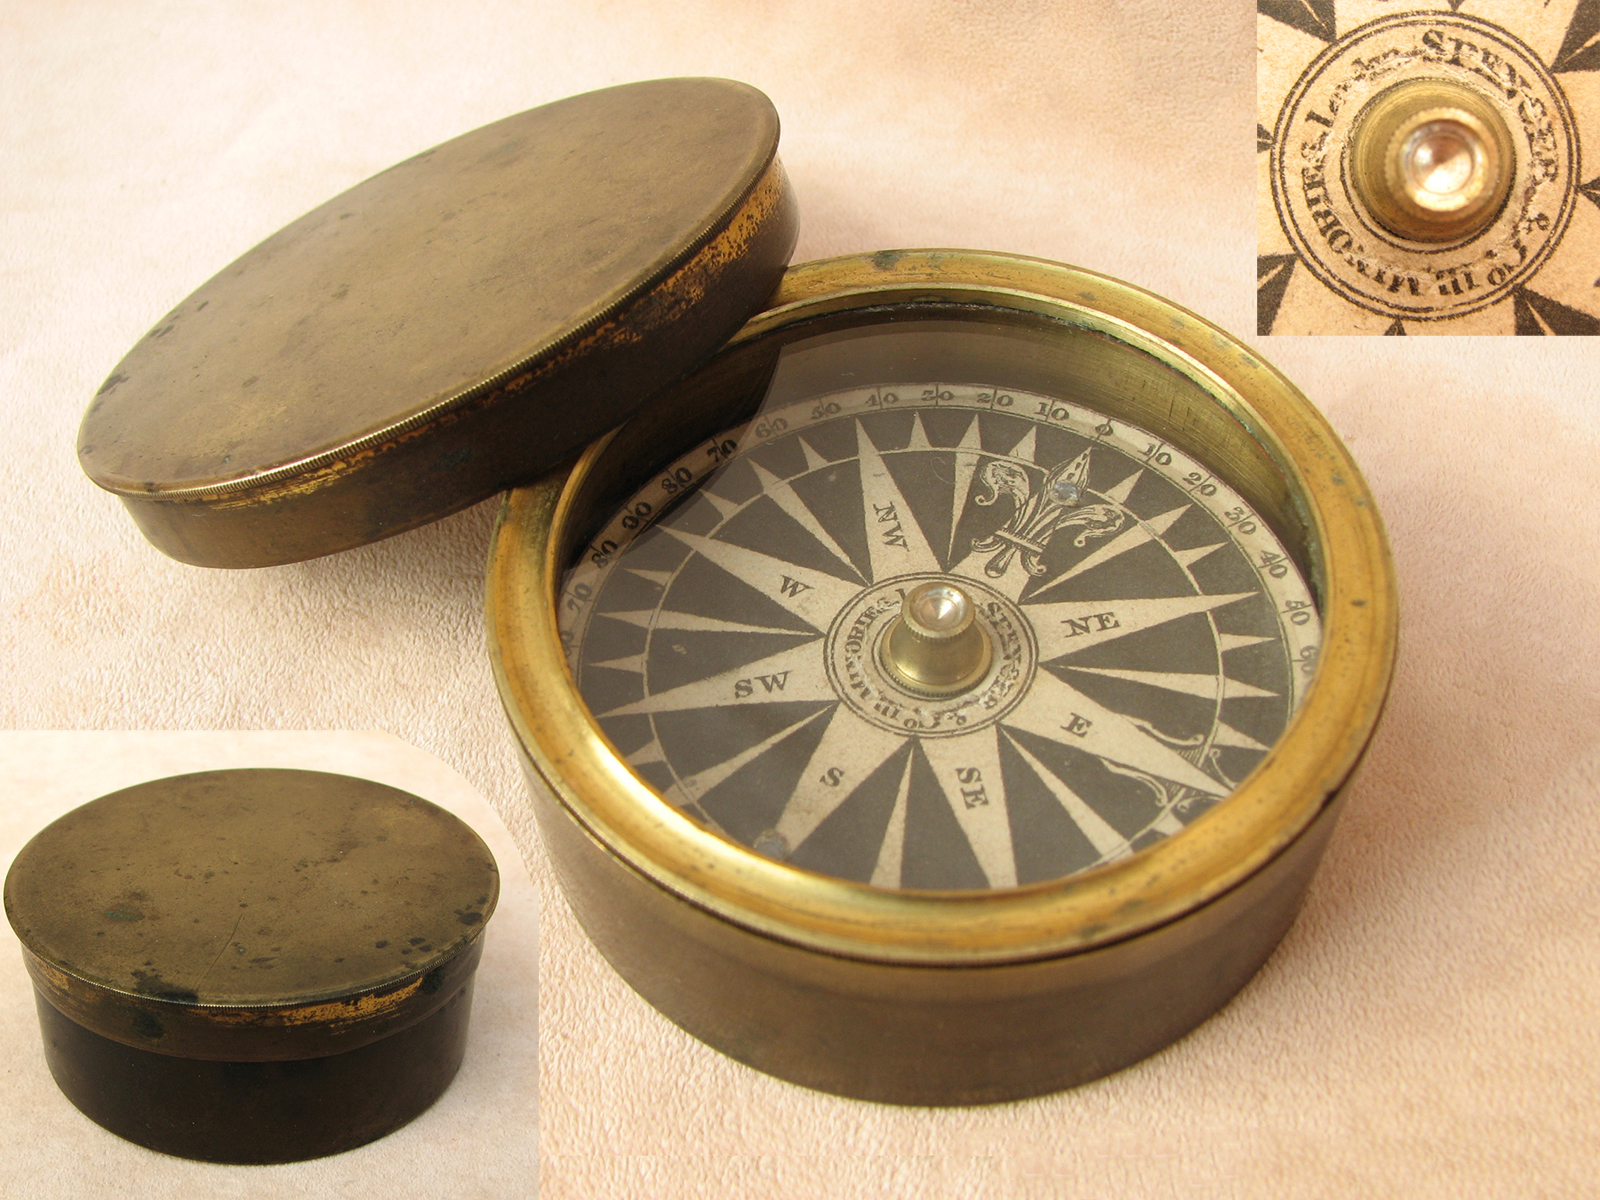 19th century explorers pocket compass by Spencer Browning & Co c1850